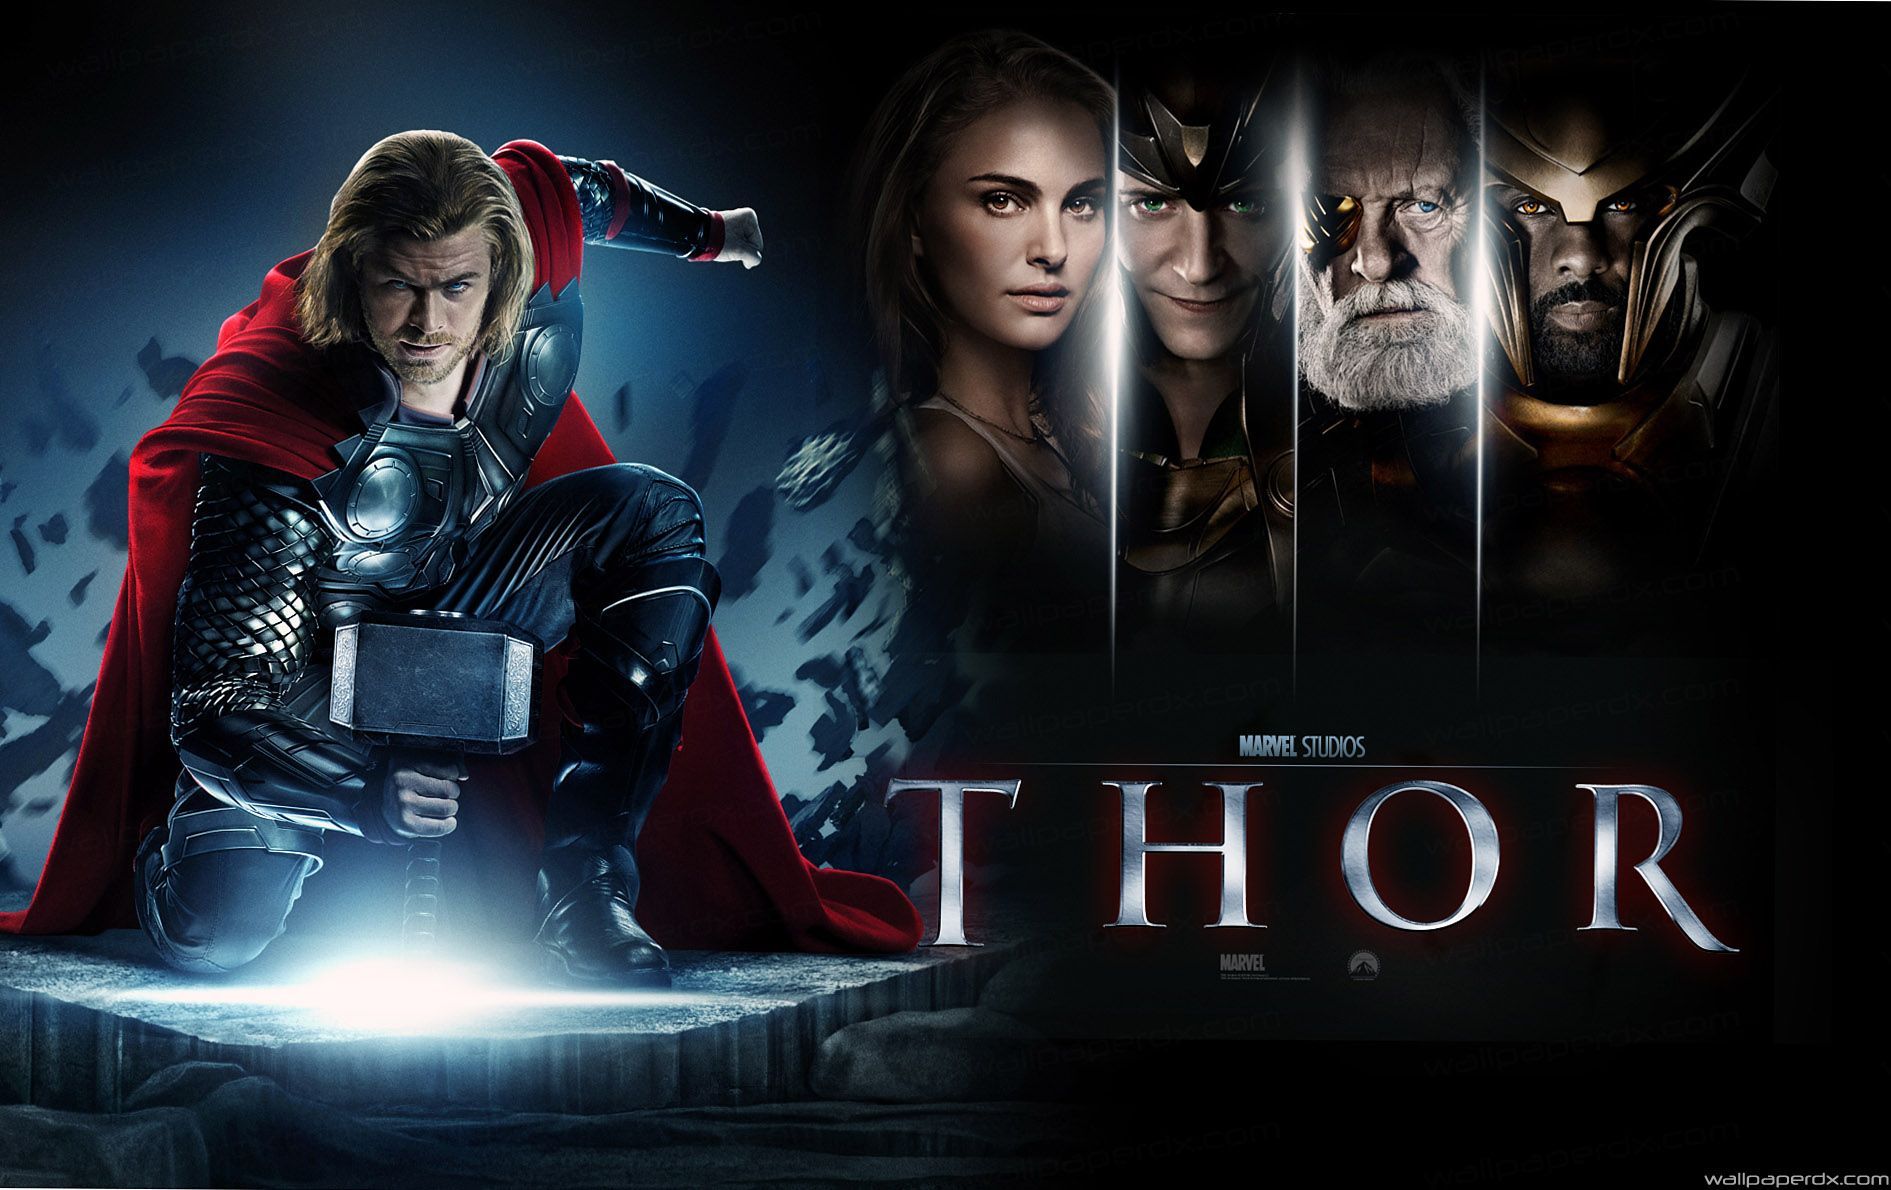 Thor Movie Poster Wallpaper Free Thor Movie Poster Background